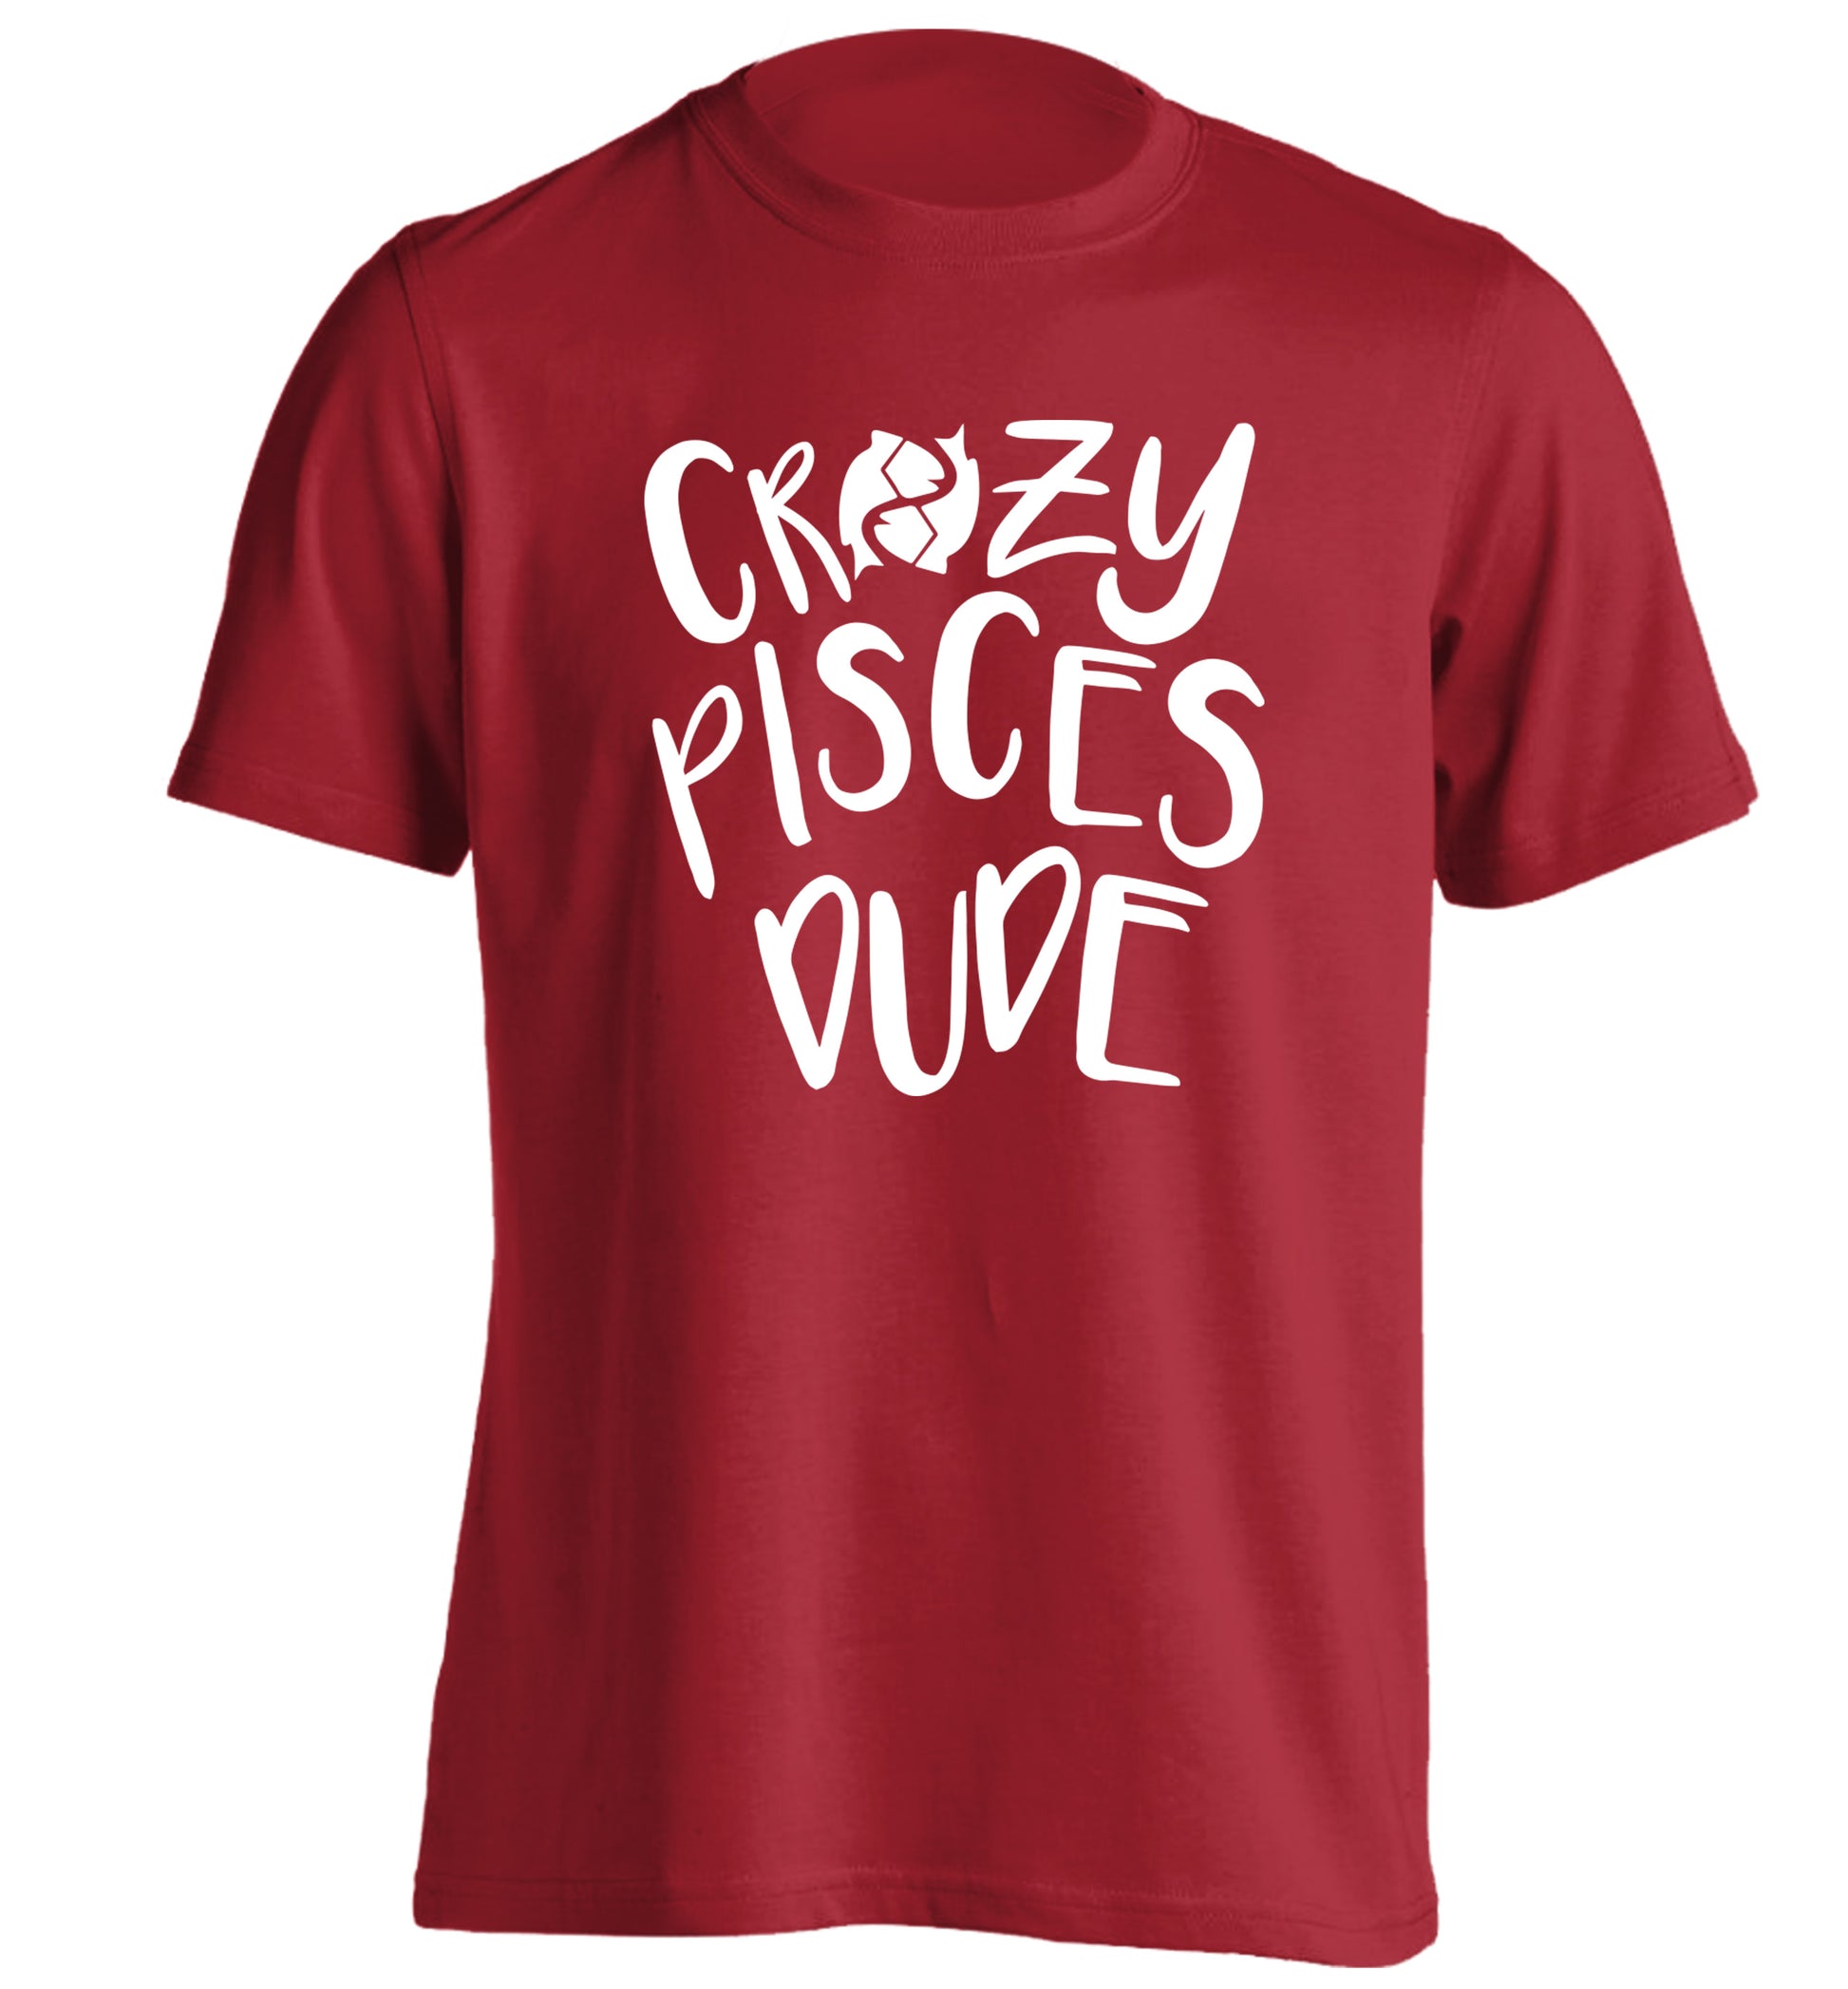 Crazy pisces dude adults unisex red Tshirt 2XL